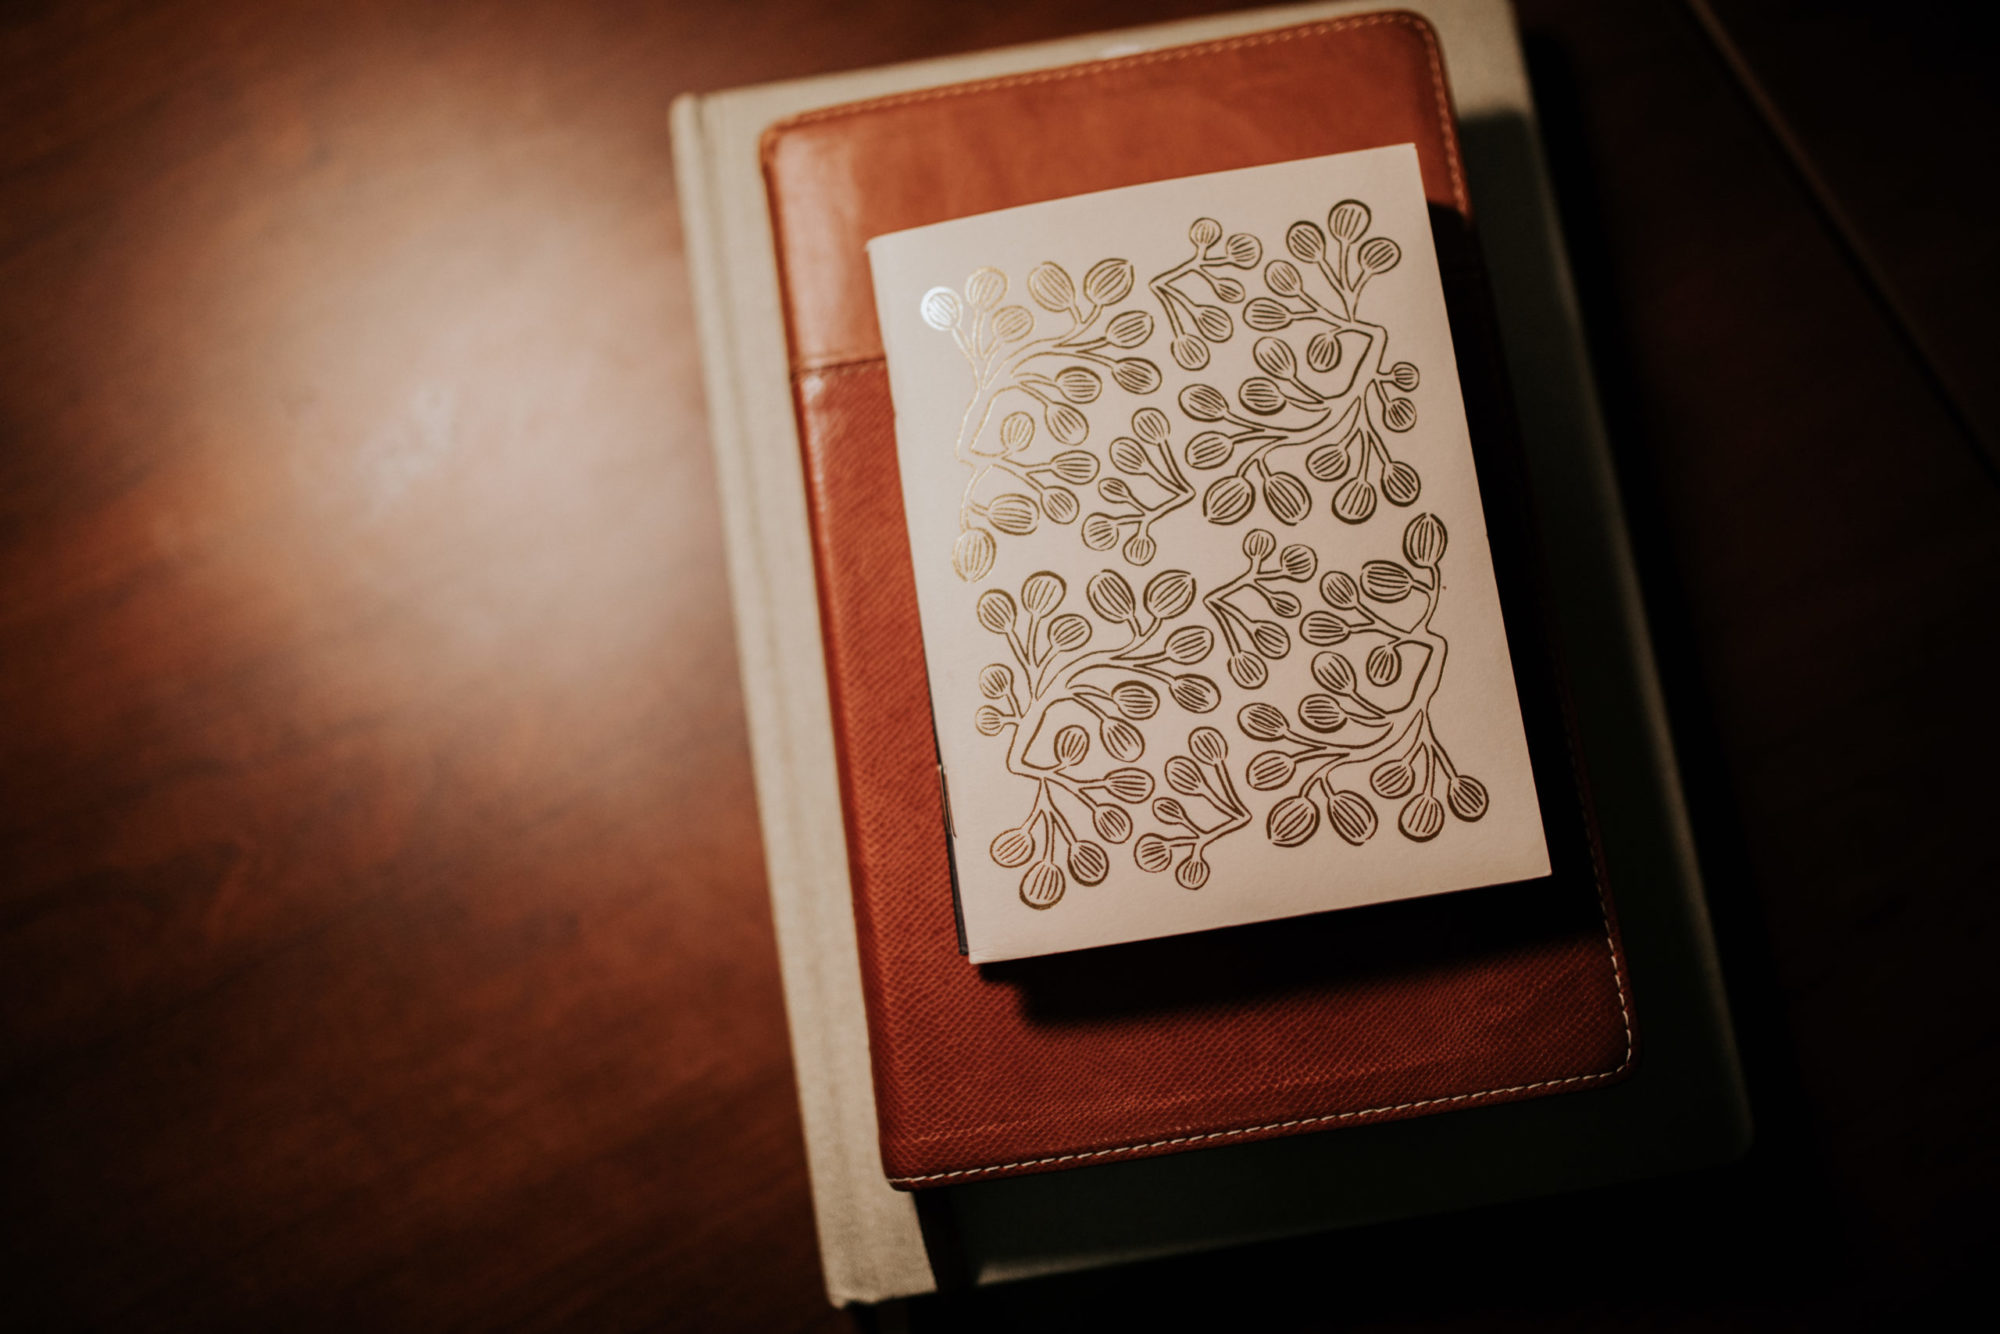 Image of a floral patterned page on top of a leather notebook and a white book.